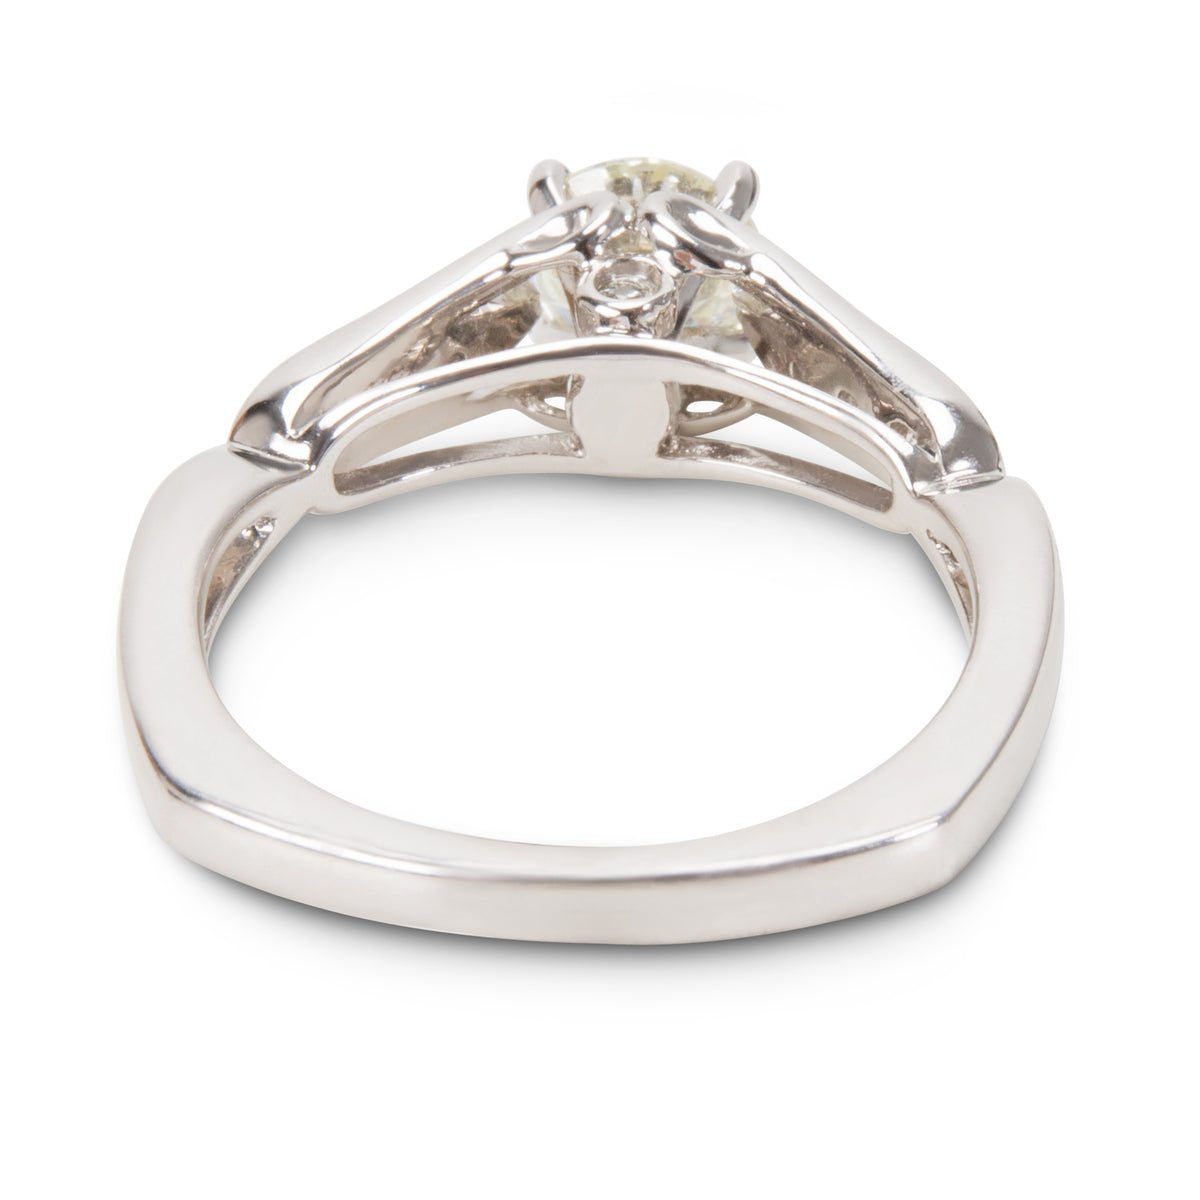 BRAND NEW Prong Set Engagement Ring in 14K White Gold with Diamonds (0.88 CTW)